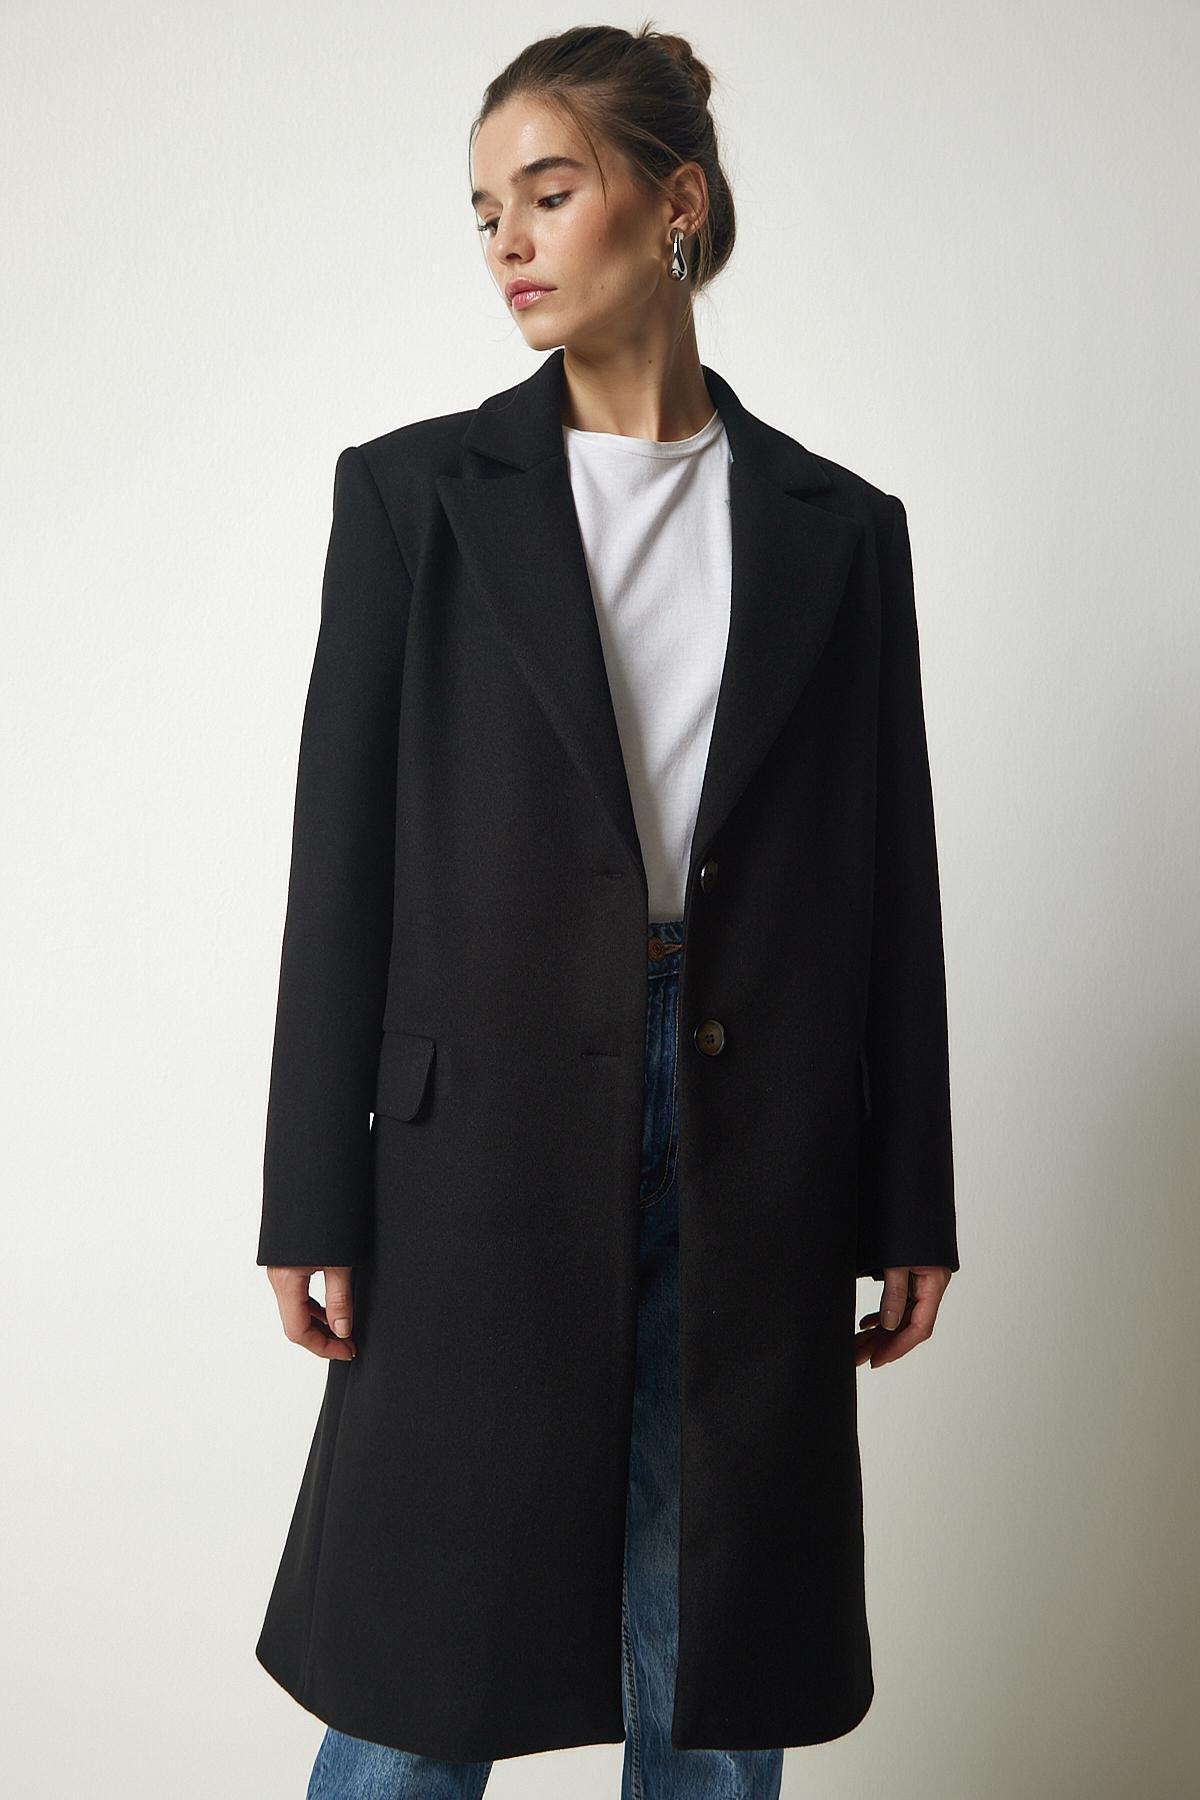 Happiness Istanbul - Black Buttoned Cachet Coat